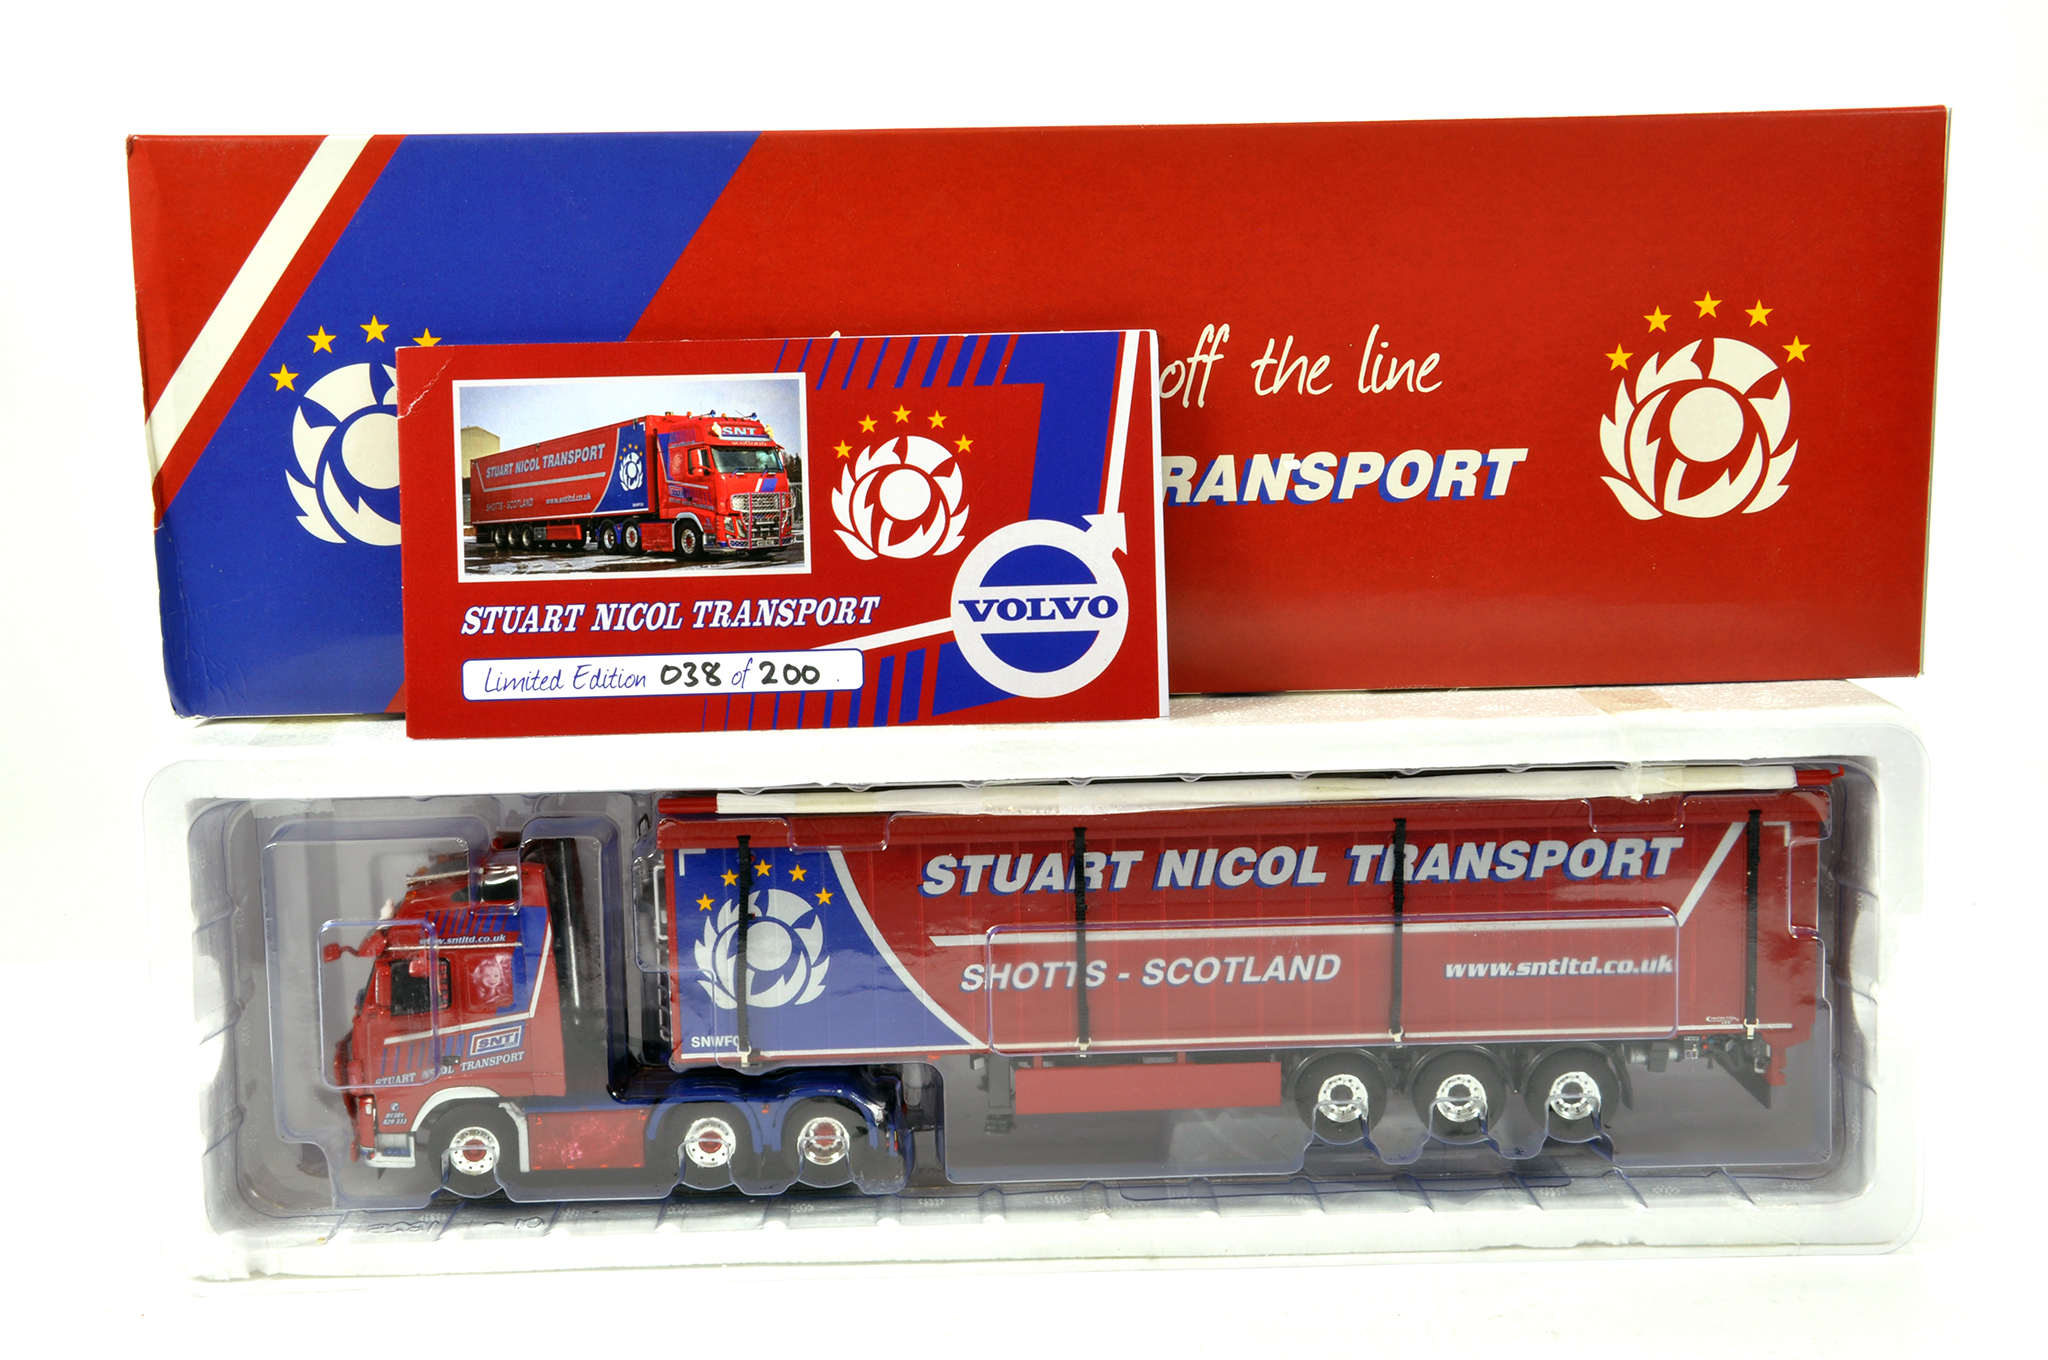 WSI 1/50 Diecast Precision Truck Issue comprising Volvo with Curtain Trailer in livery of Stuart